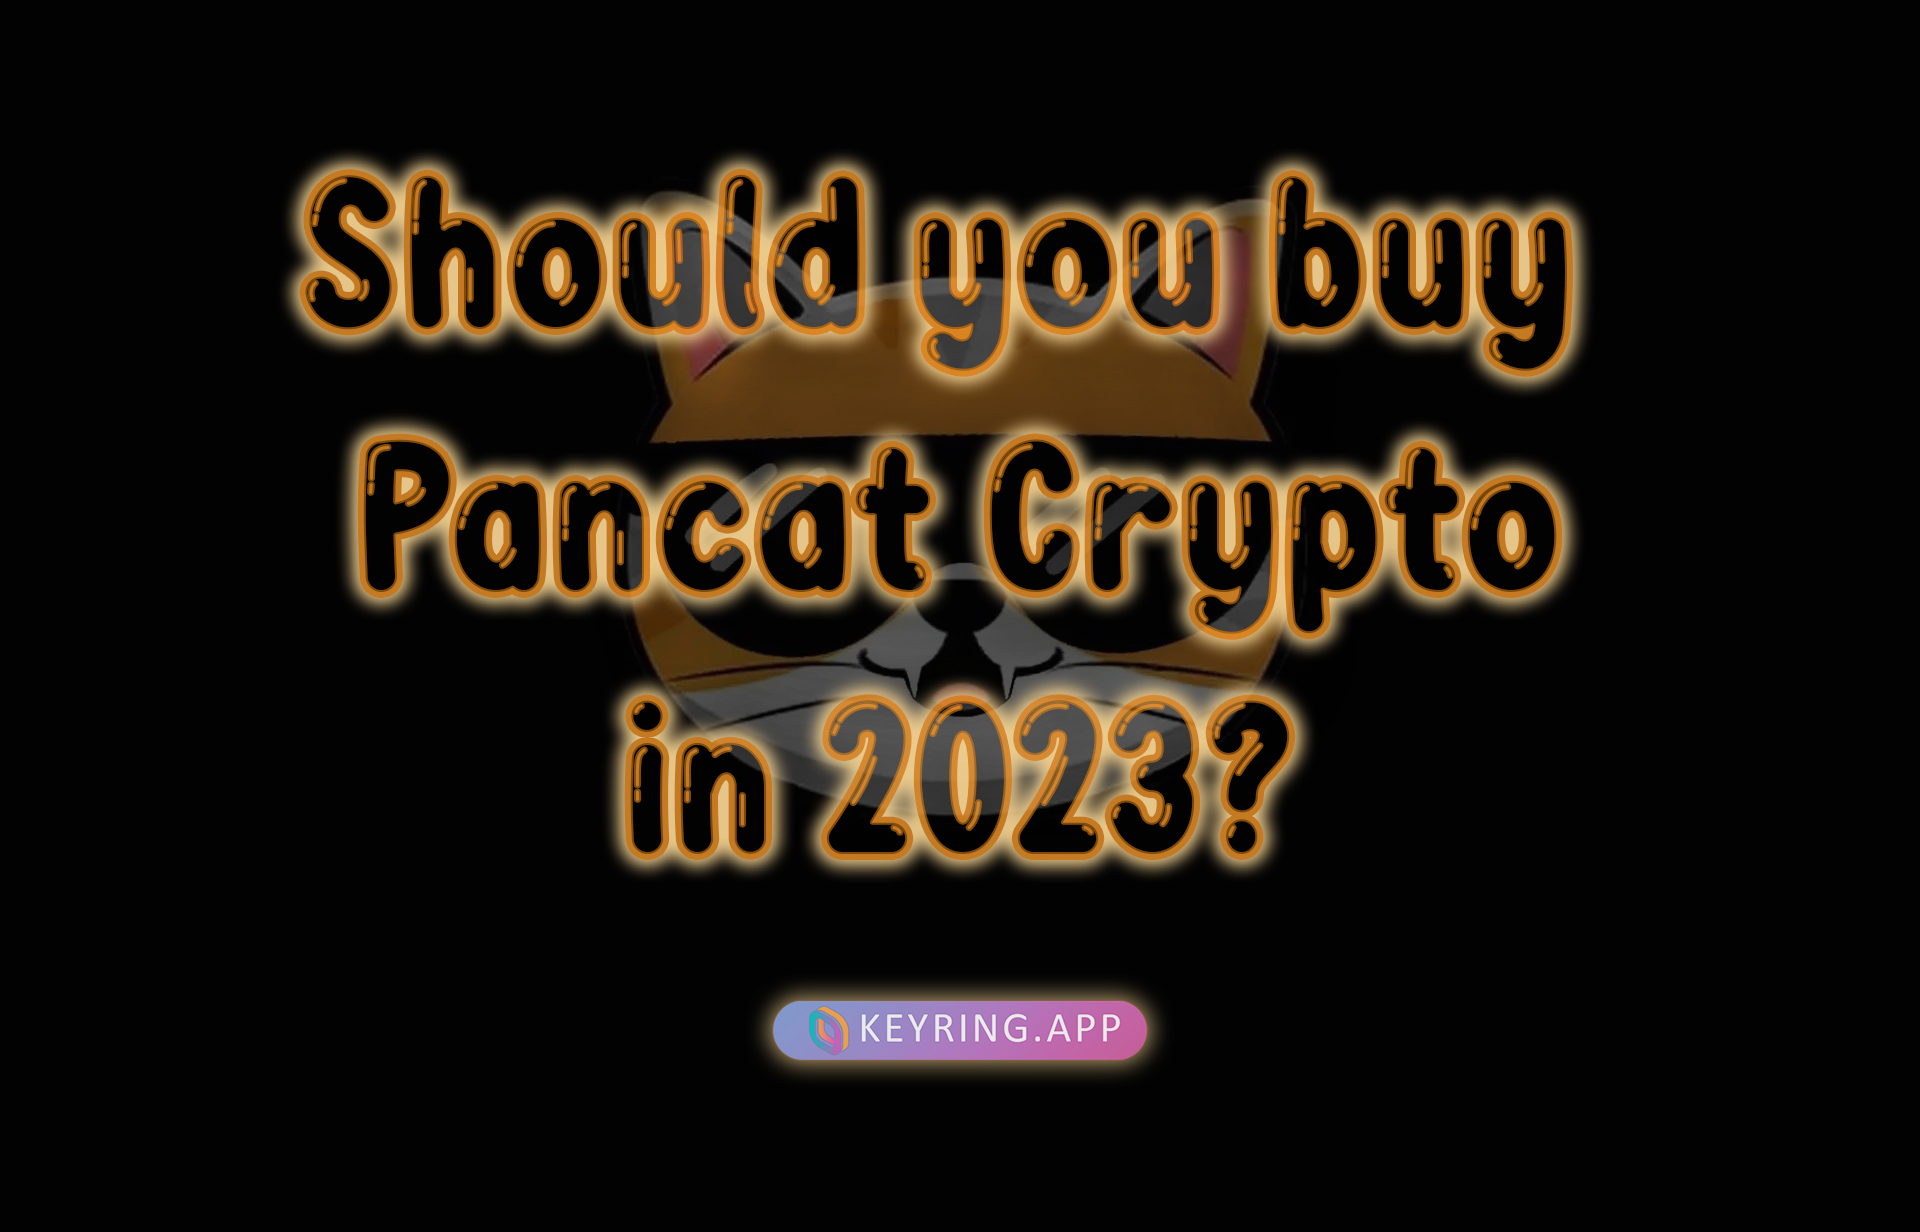 Should you buy Pancat cryptocurrency